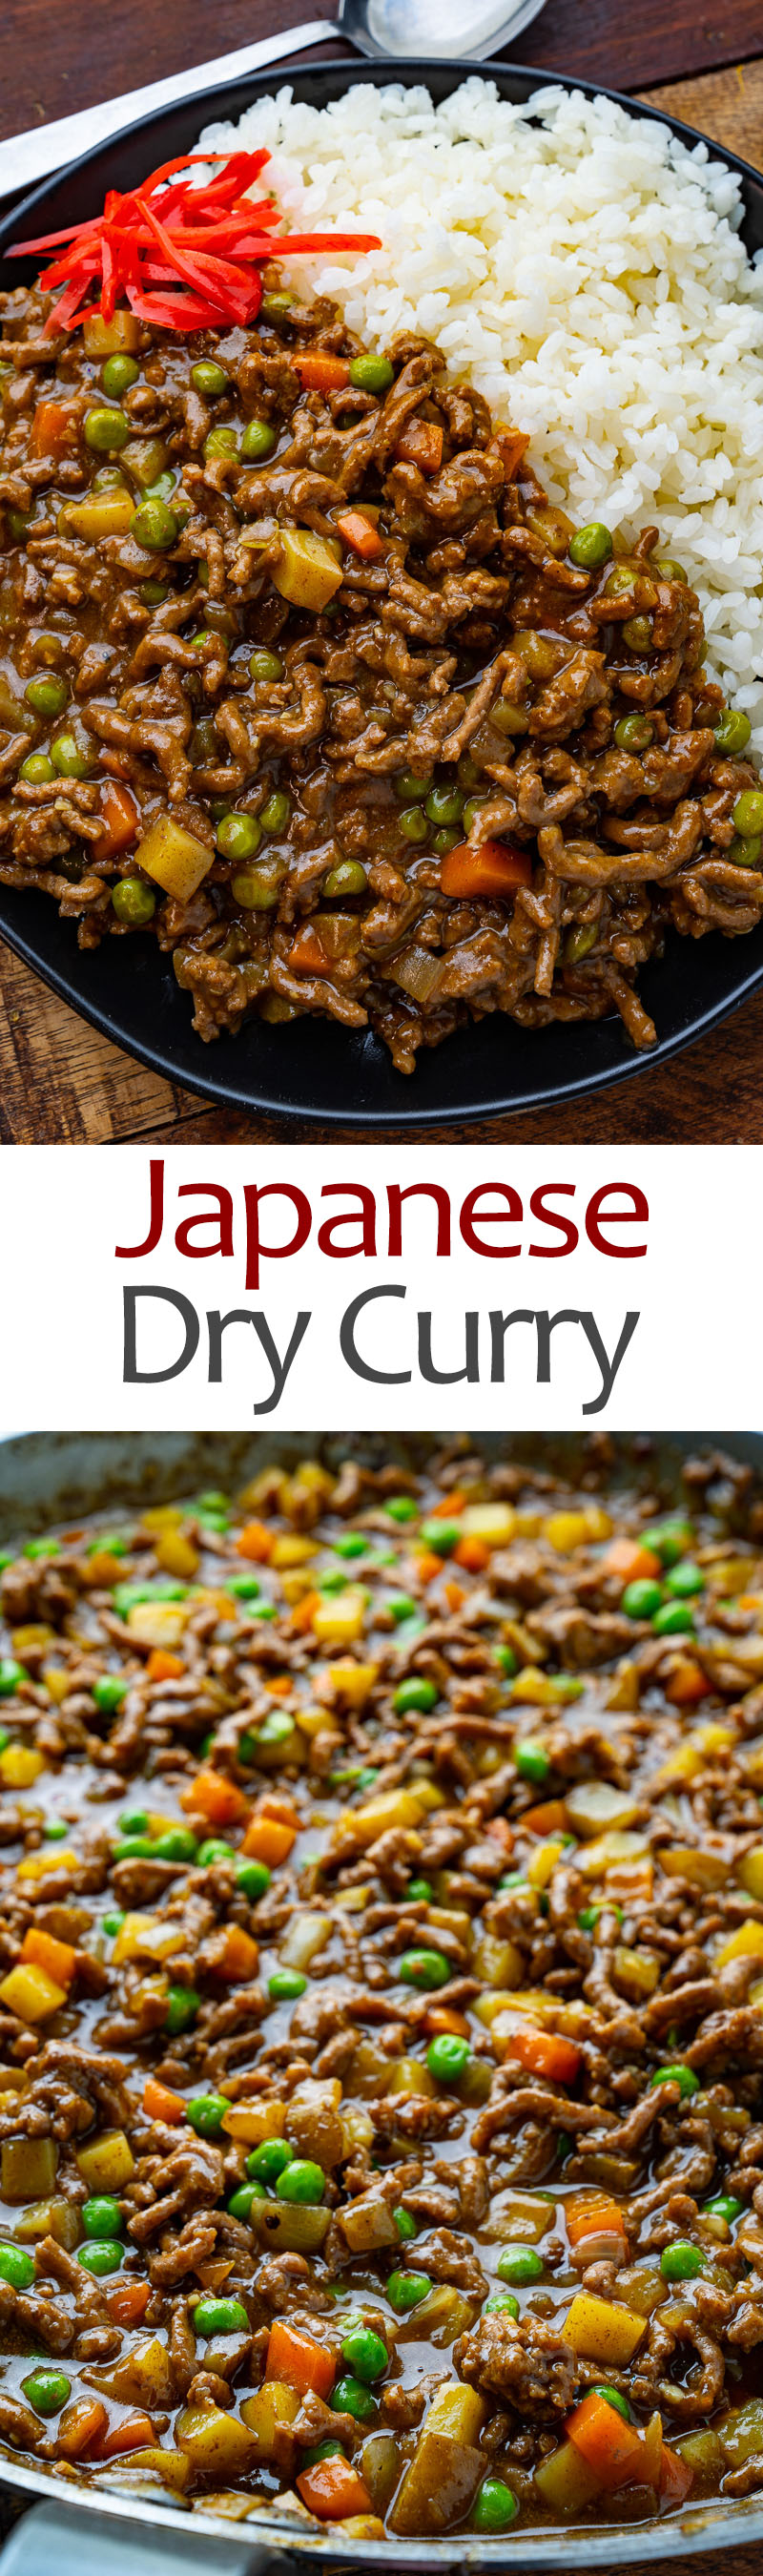 Japanese Dry Curry